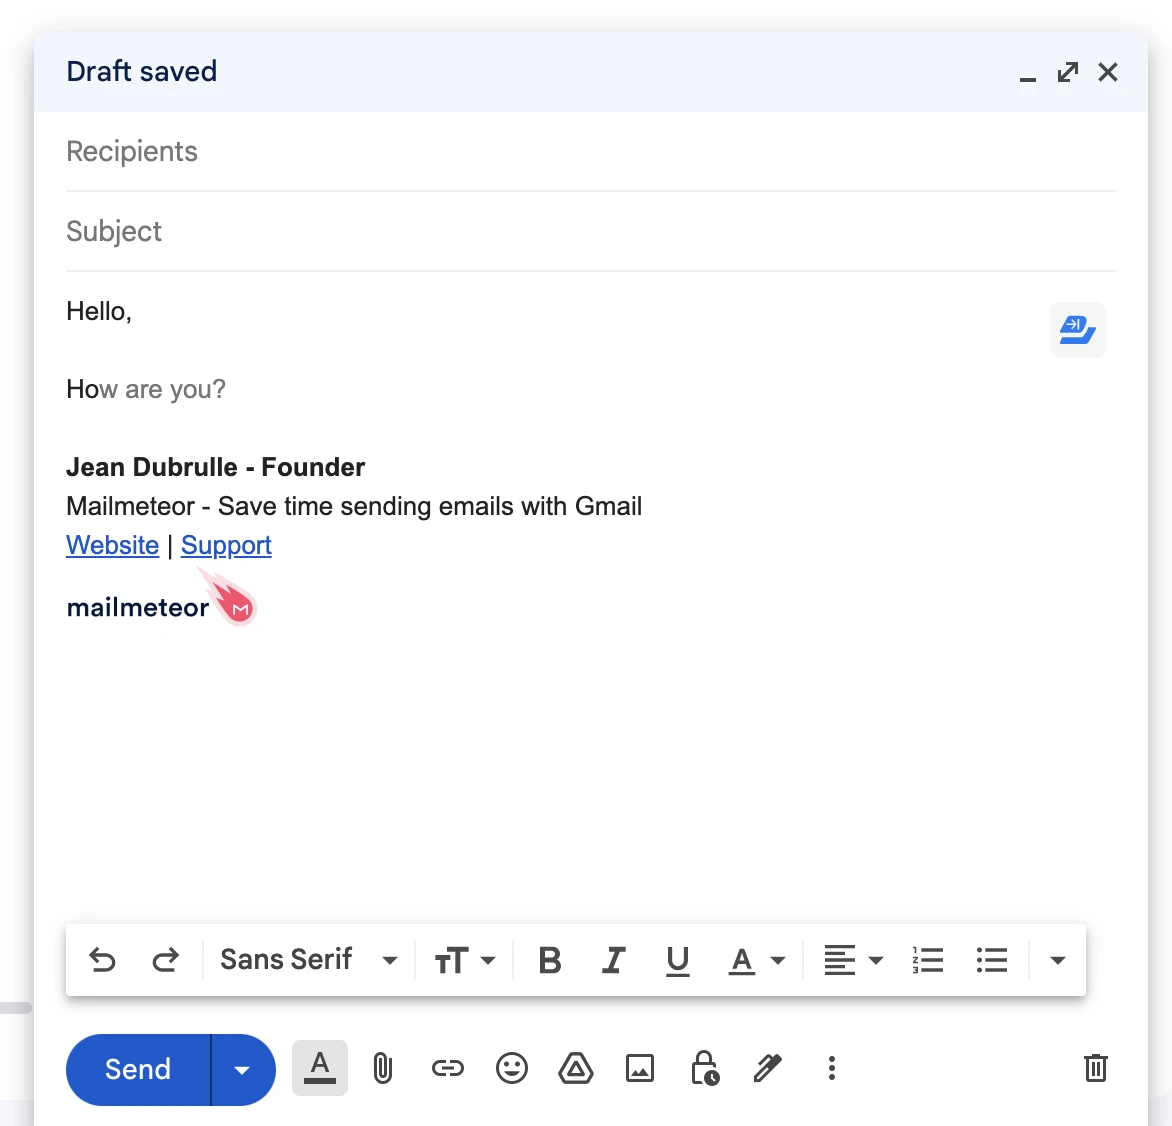 Gmail's smart compose